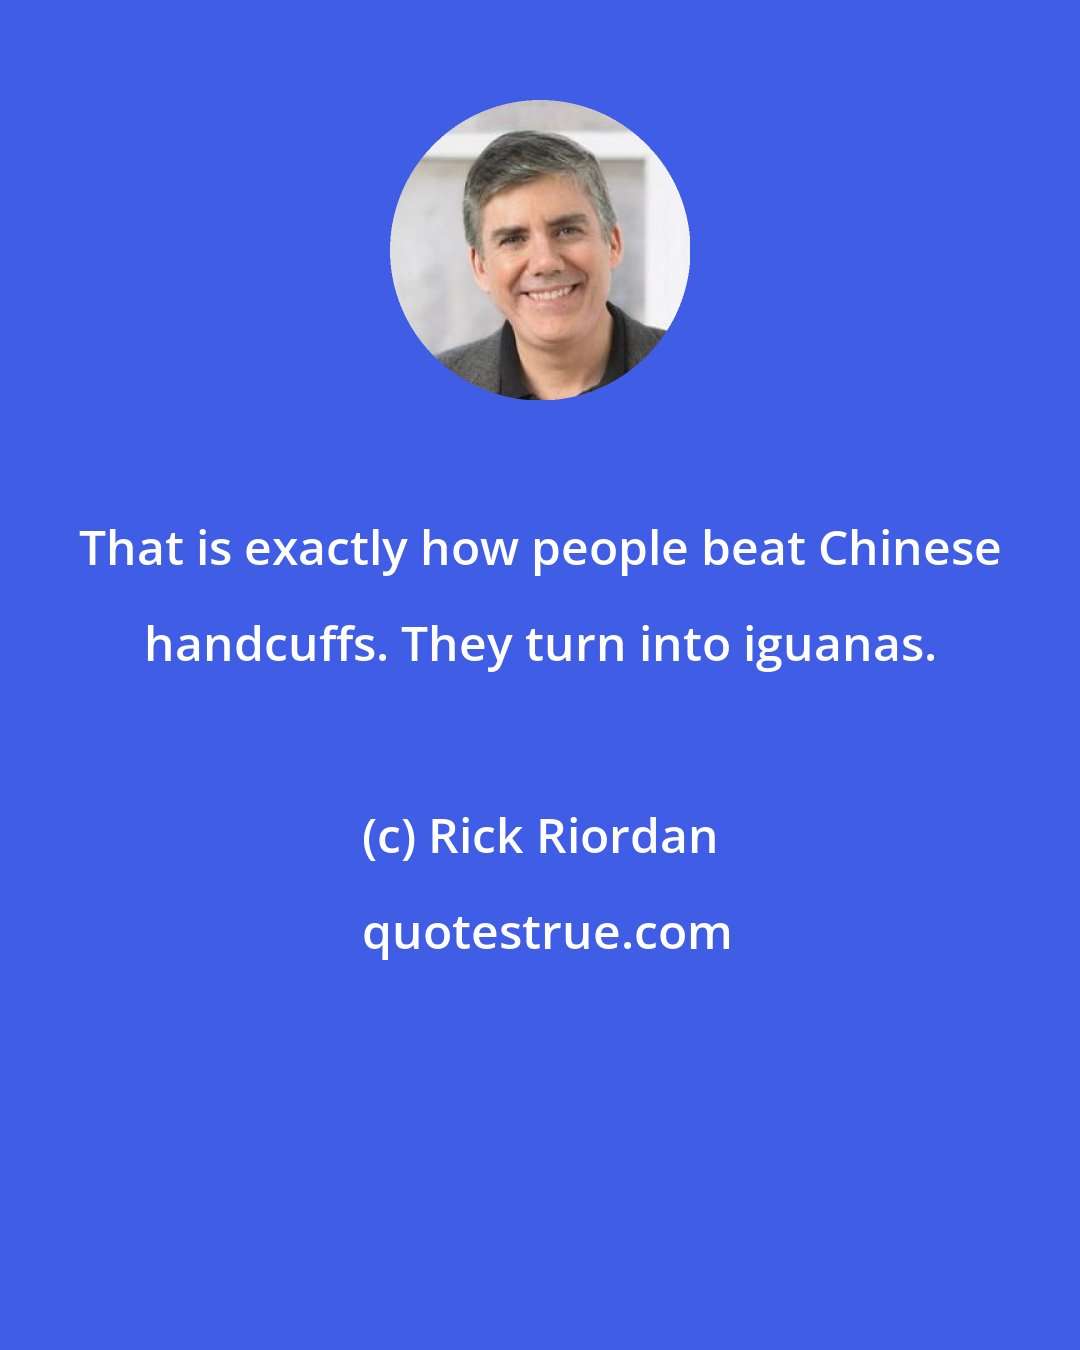 Rick Riordan: That is exactly how people beat Chinese handcuffs. They turn into iguanas.